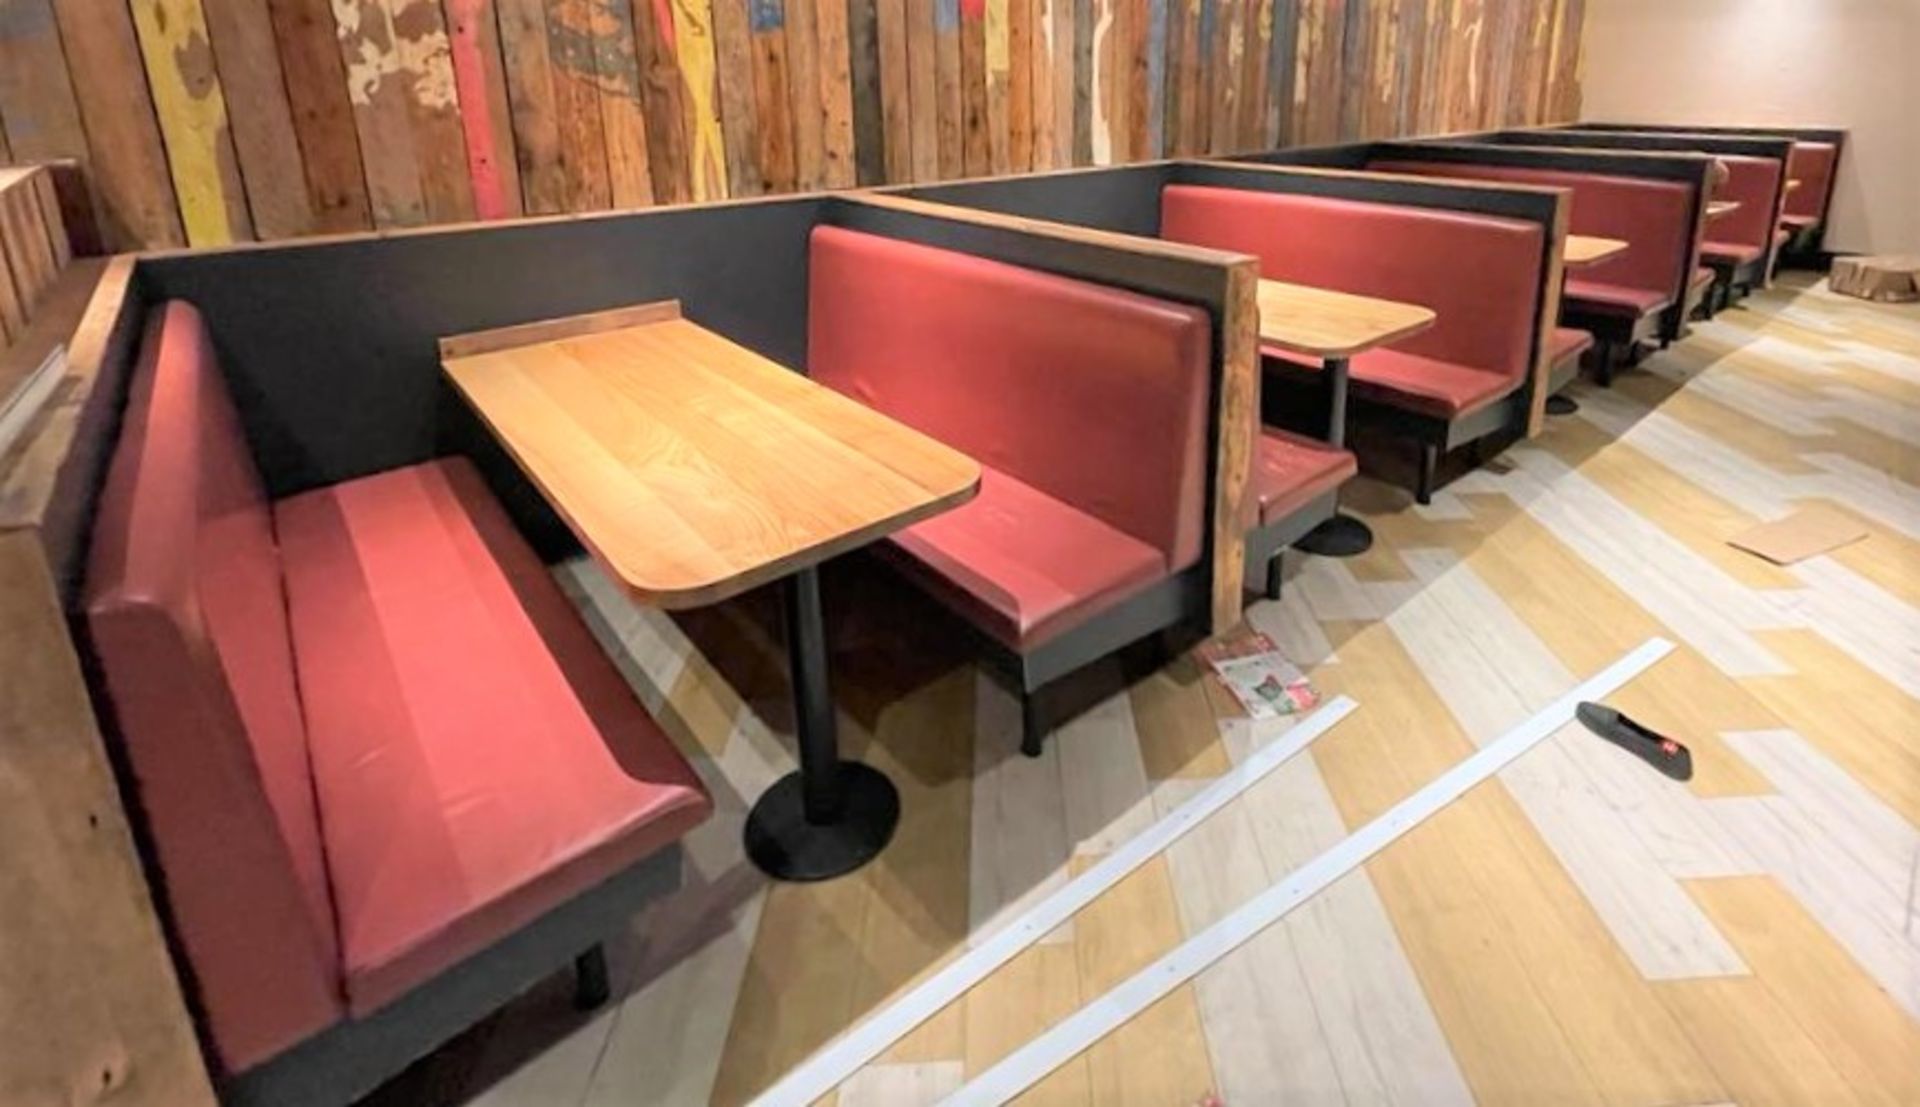 5 x Restaurant Leather Seating Booths With Oak Tables - Includes 10 x Seating Benches Upholstered in